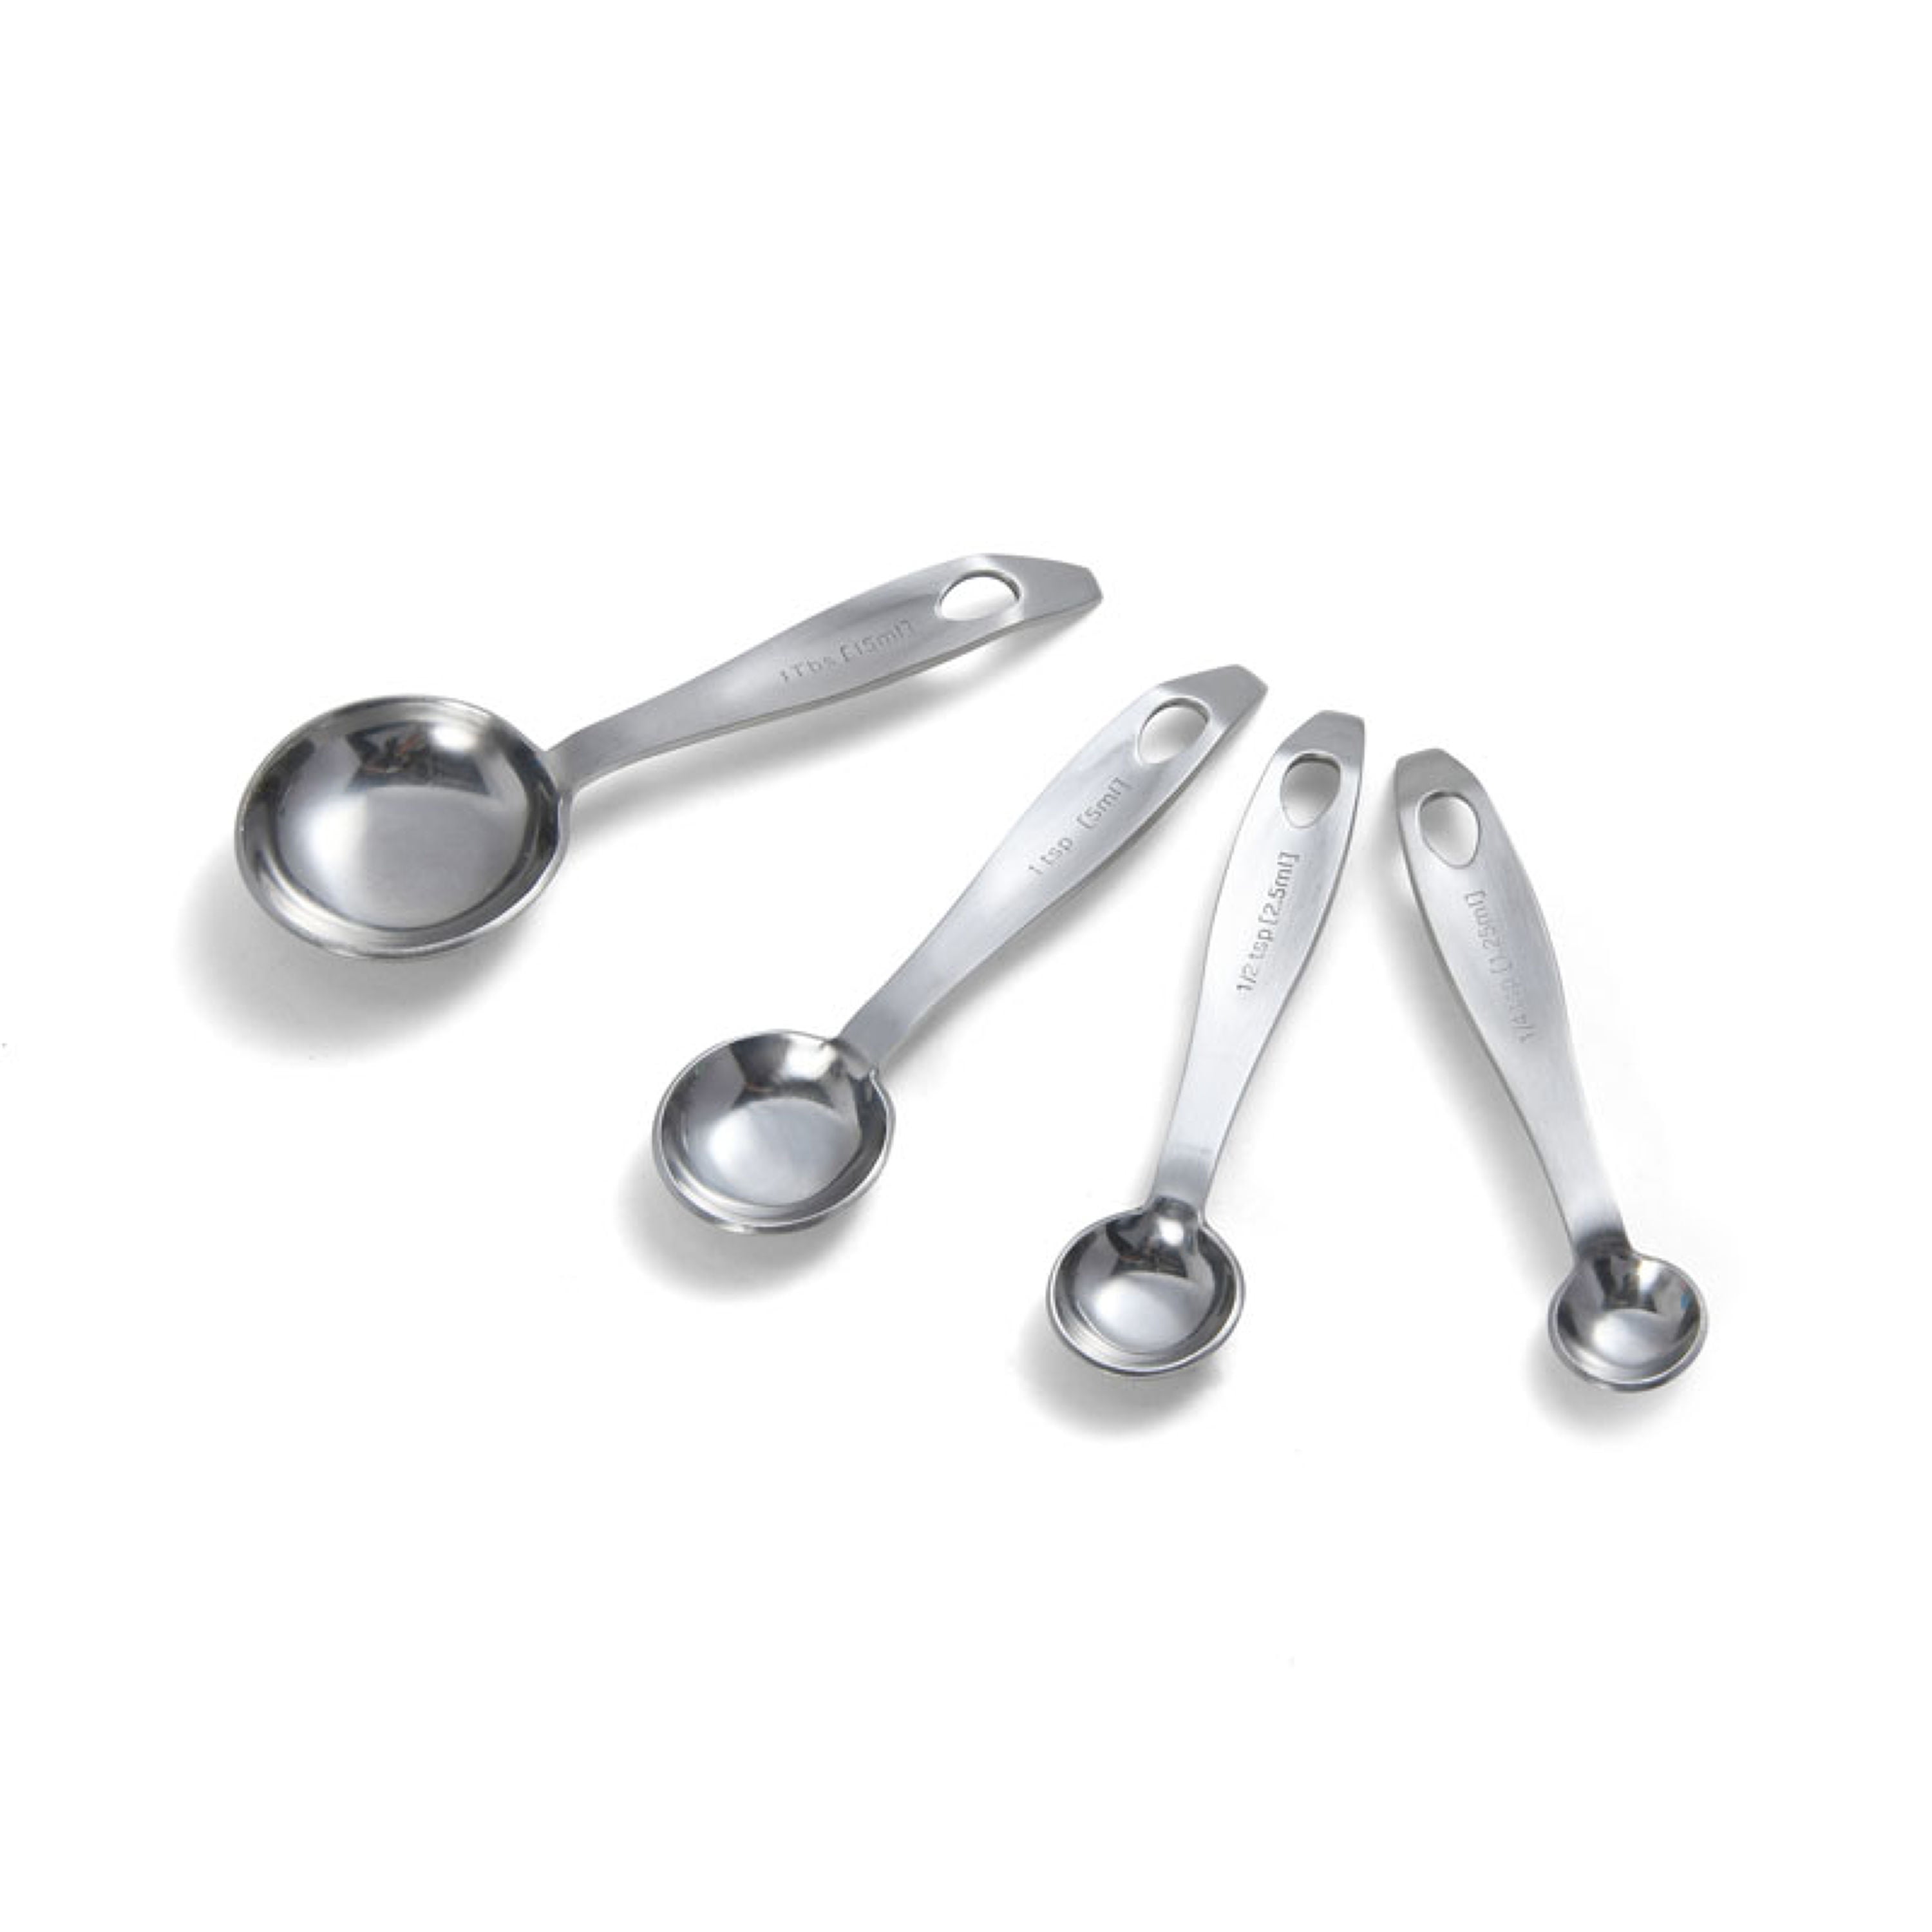 MEASURING CUP SET - STAINLESS STEEL-AMCO-8440